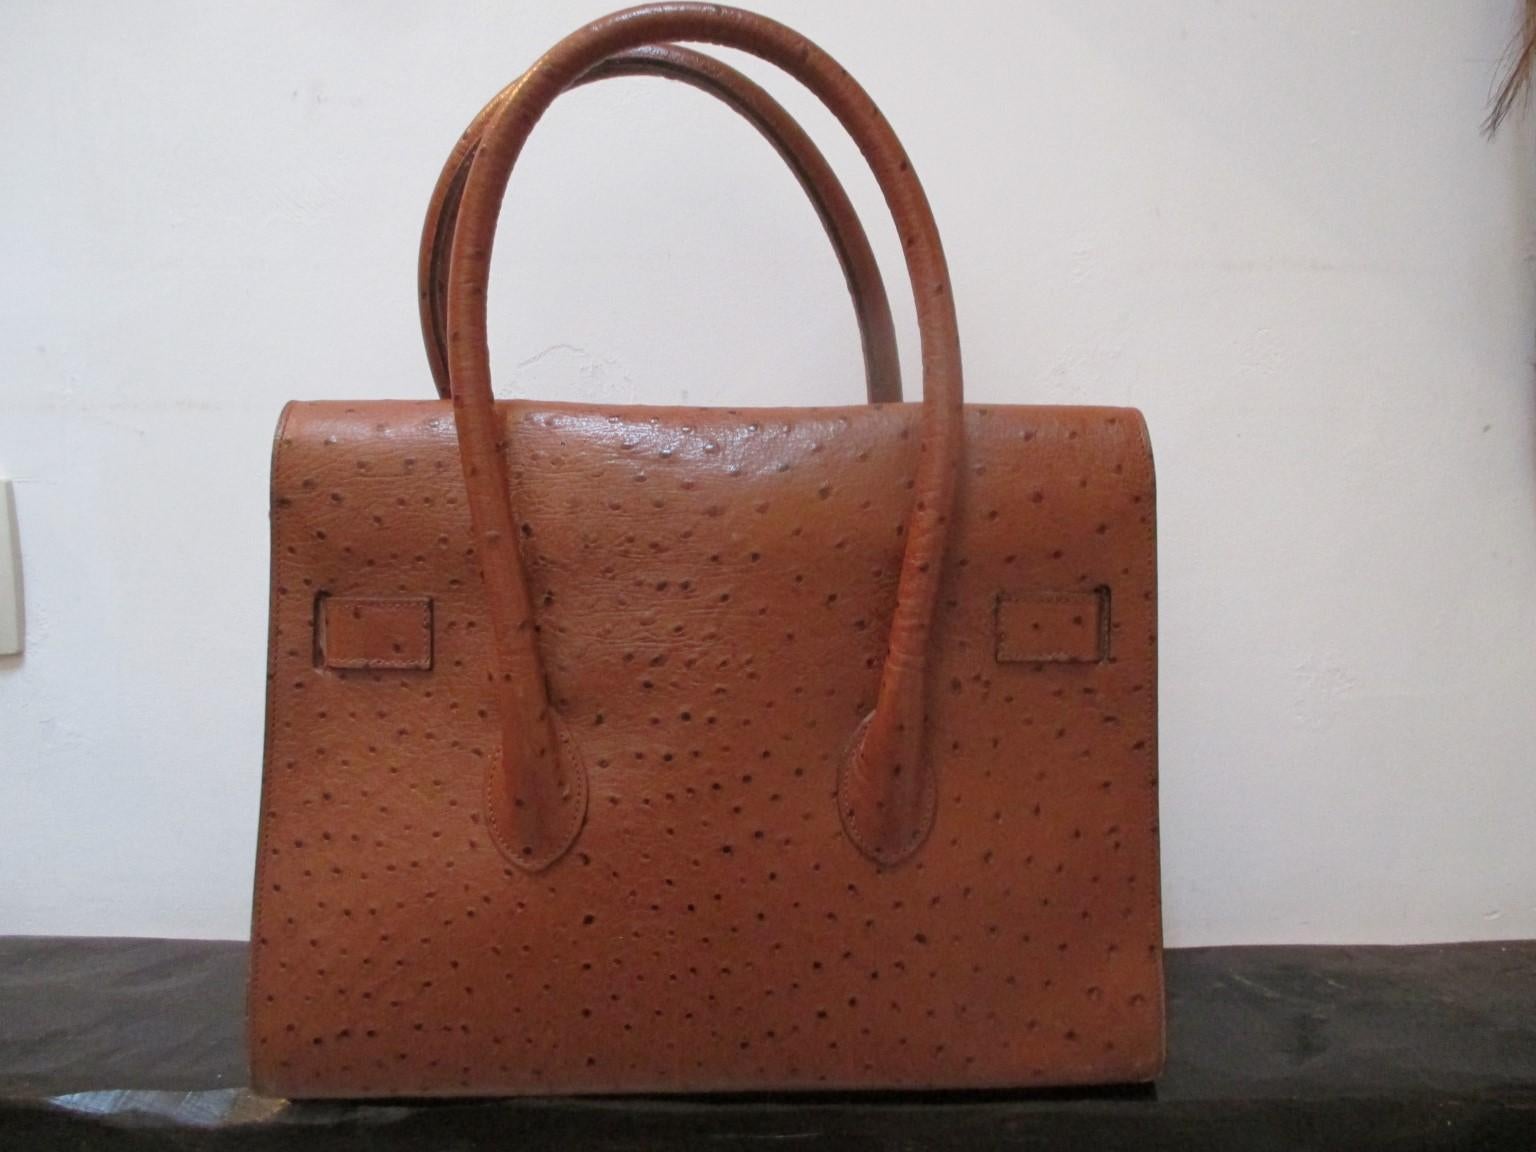 Brown/cognac embossed ostrich leather bag with gold hardware.
Lining is leather with 1 zipper pocket
good vintage condition with some wear.
size; 24.5cm  x 31.5cm  x 12 cm
Please note that vintage items are not new and therefore might have minor